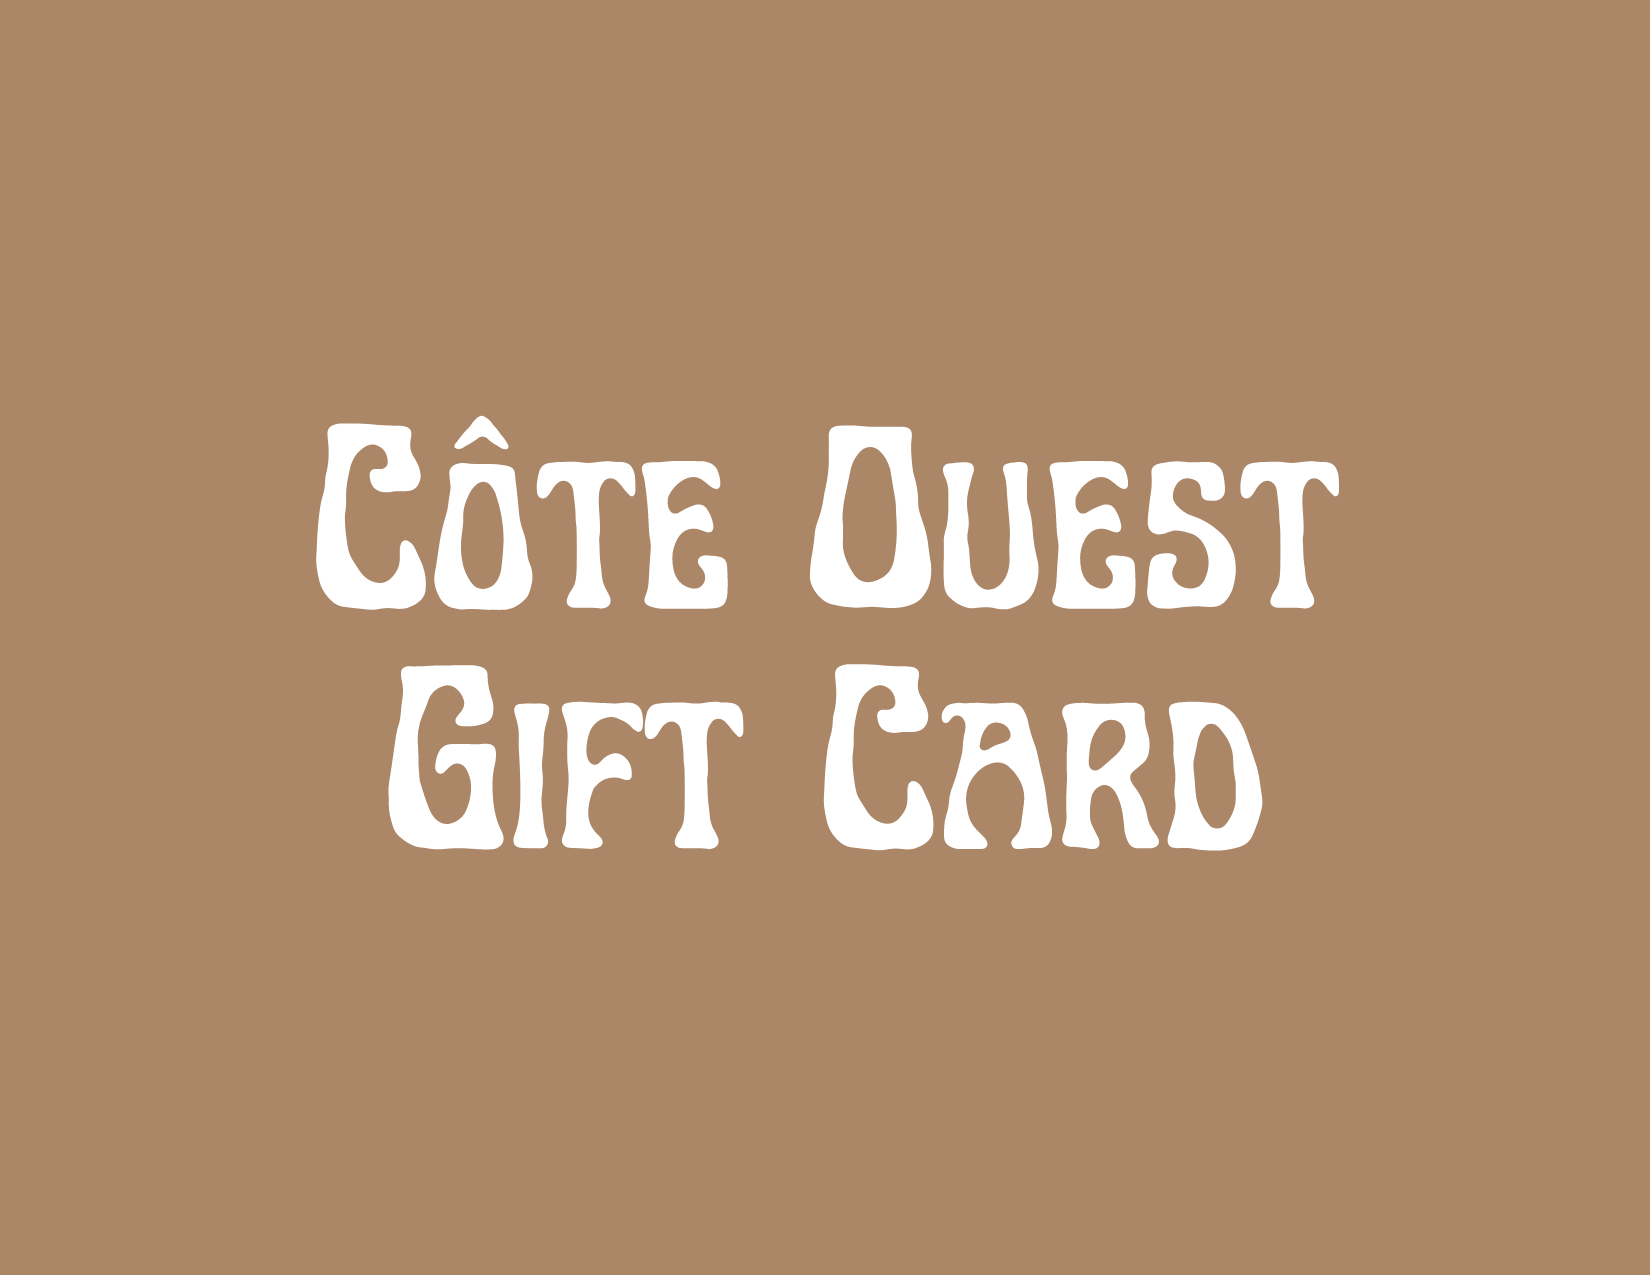 Côte Ouest Gift Card